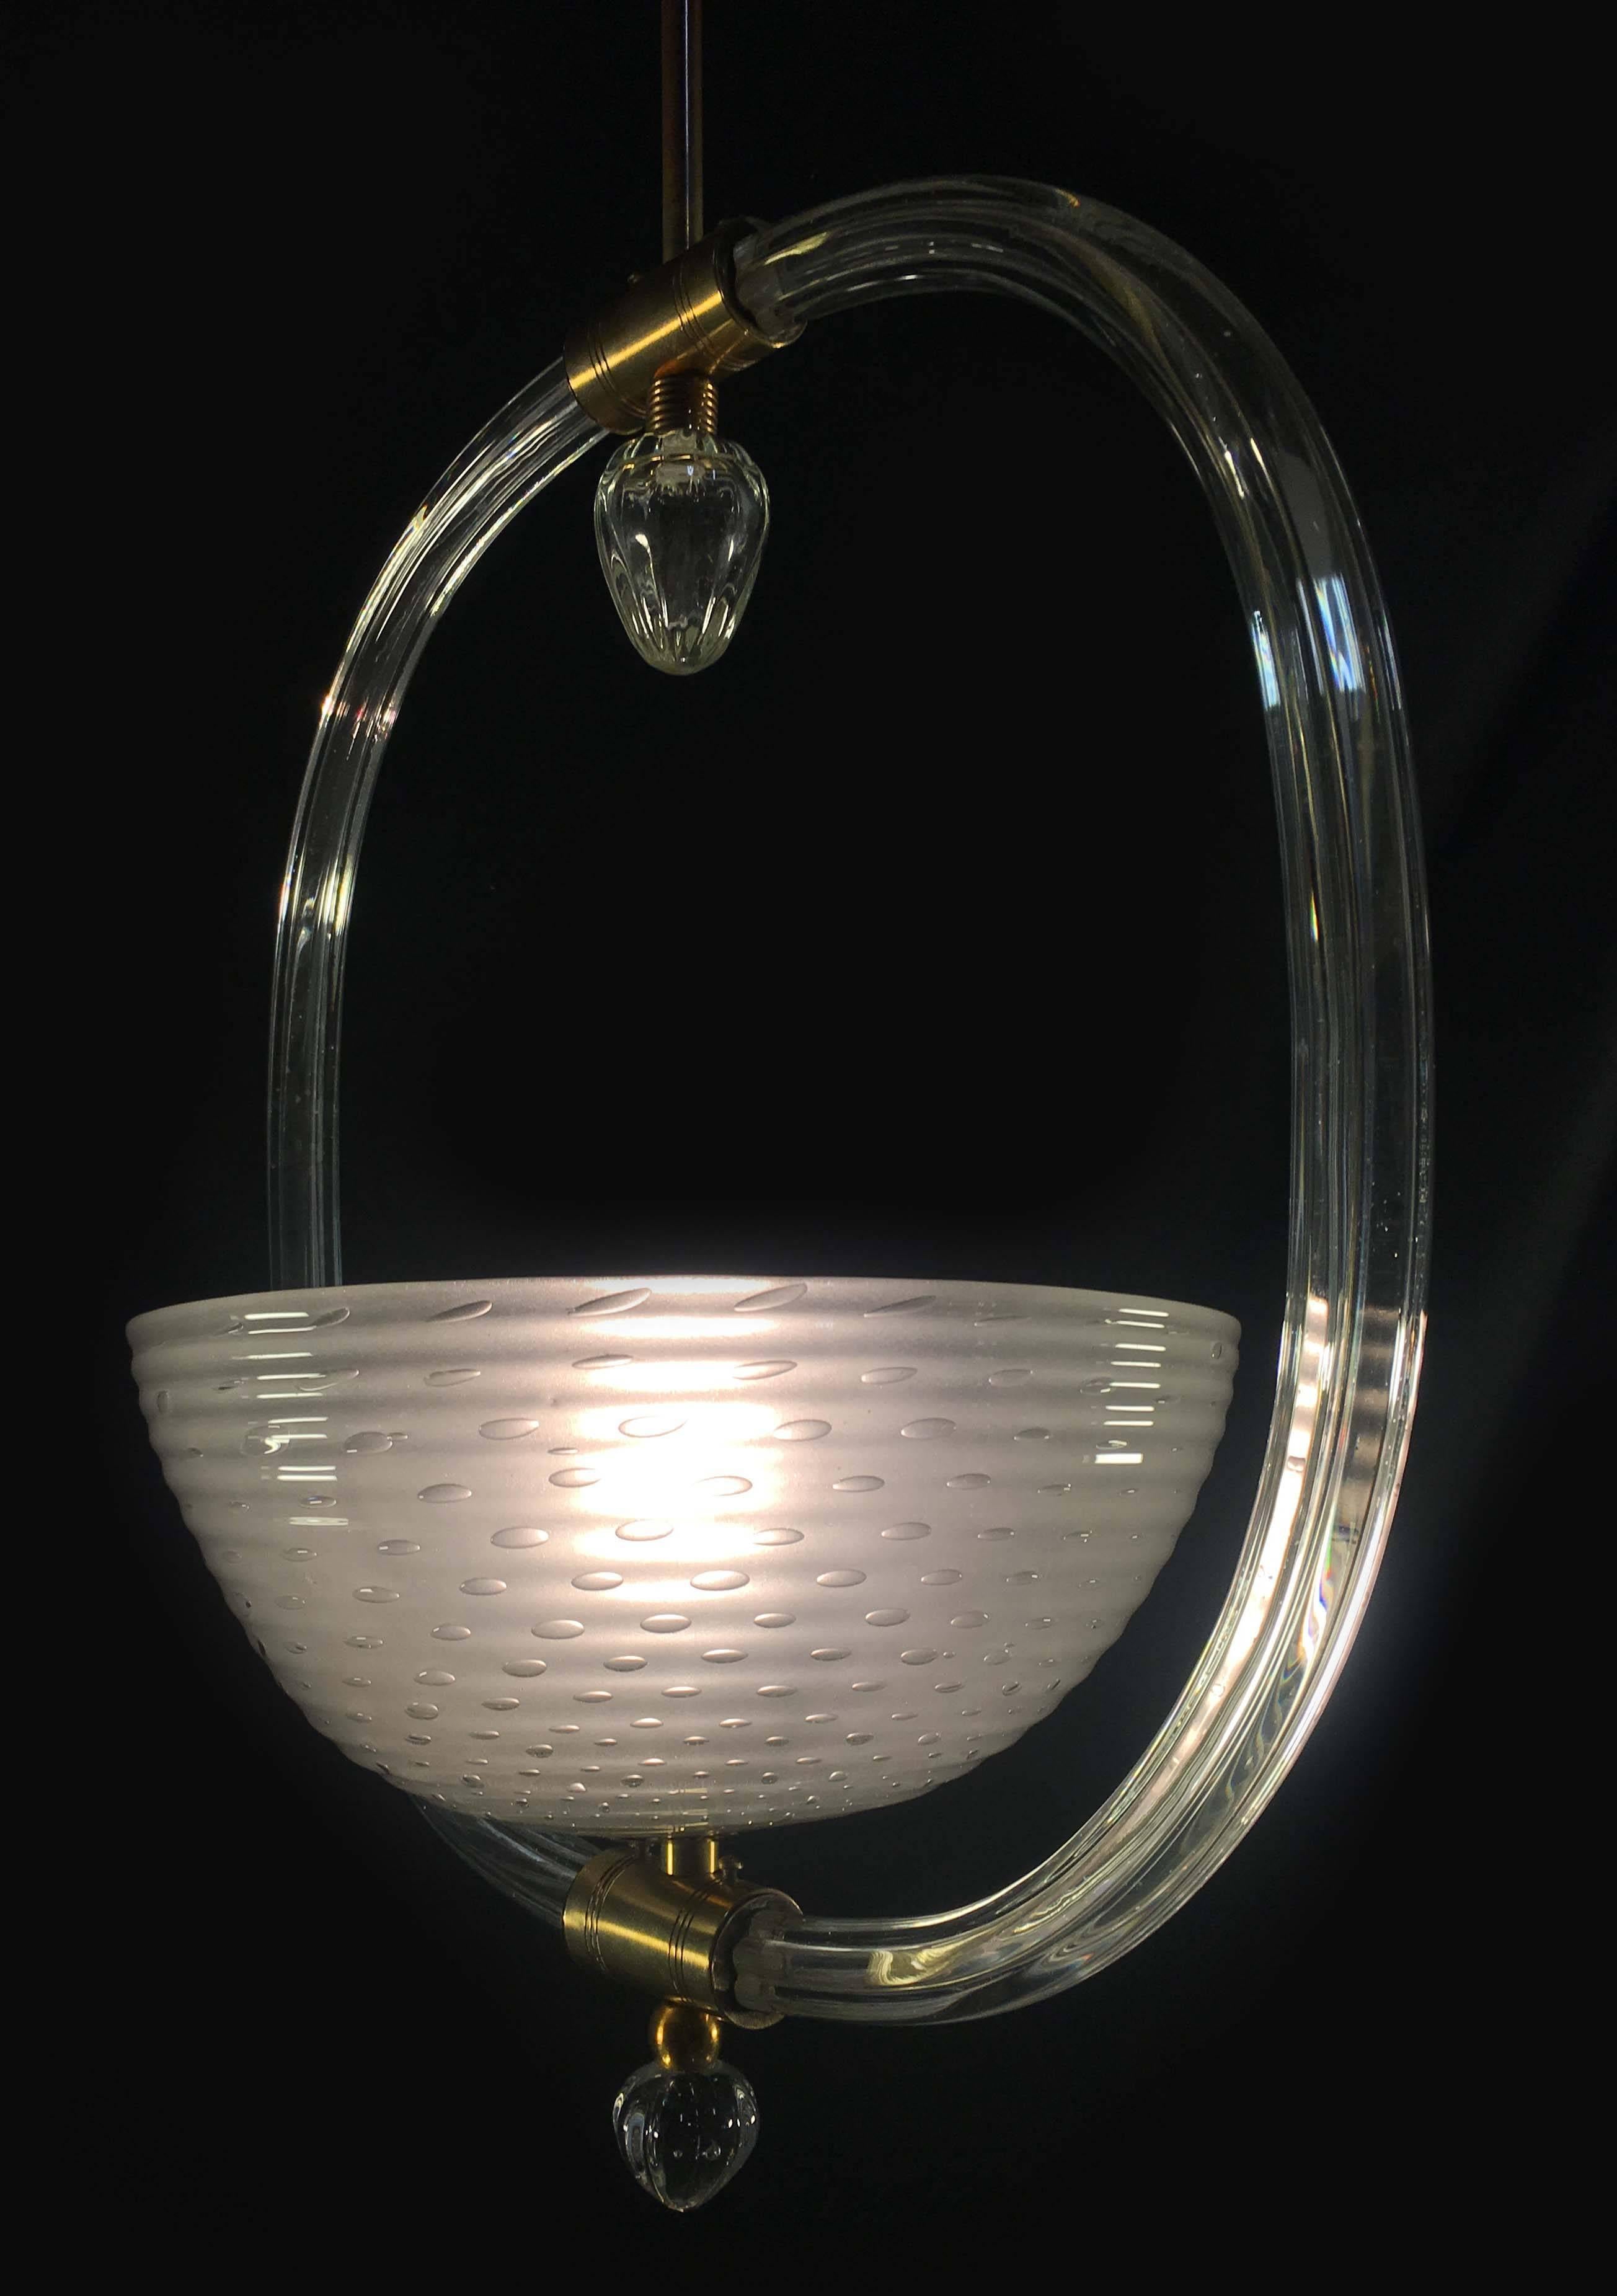 Chandelier with sober and elegant shapes. An authentic jewel out of the Murano furnaces.
 